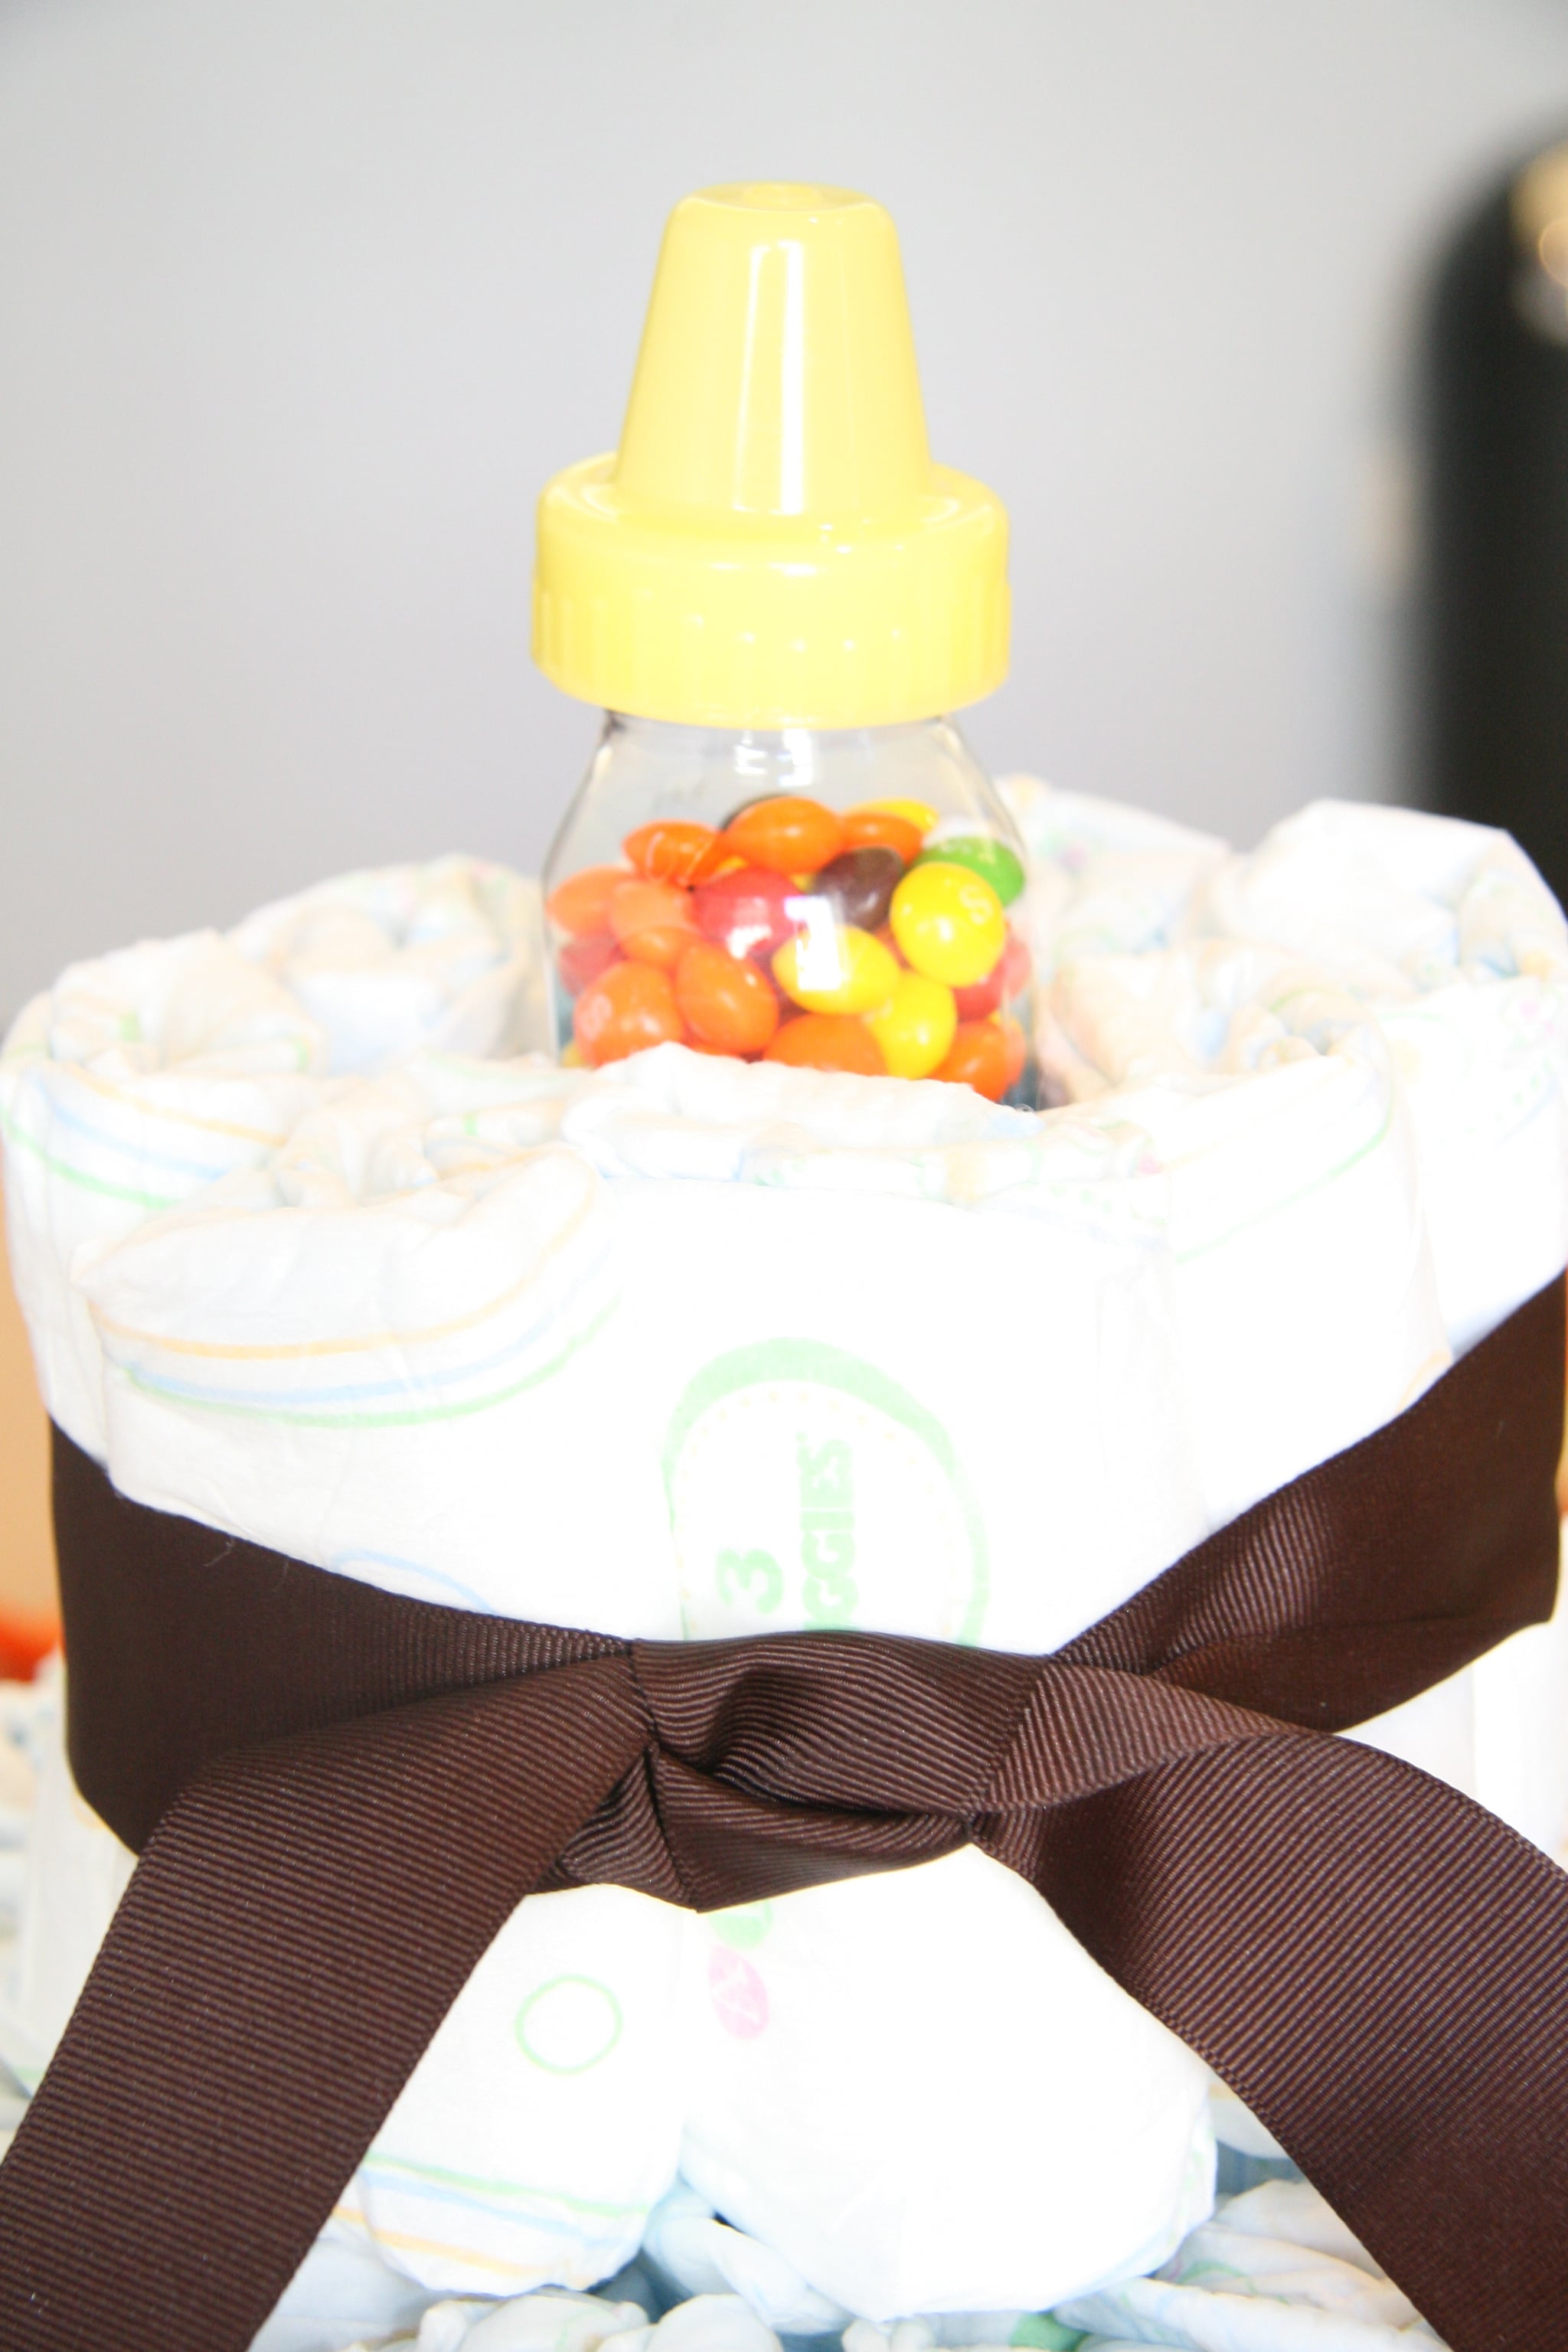 Instead of filling the top layer with diapers, put a candy filled bottle in the center.